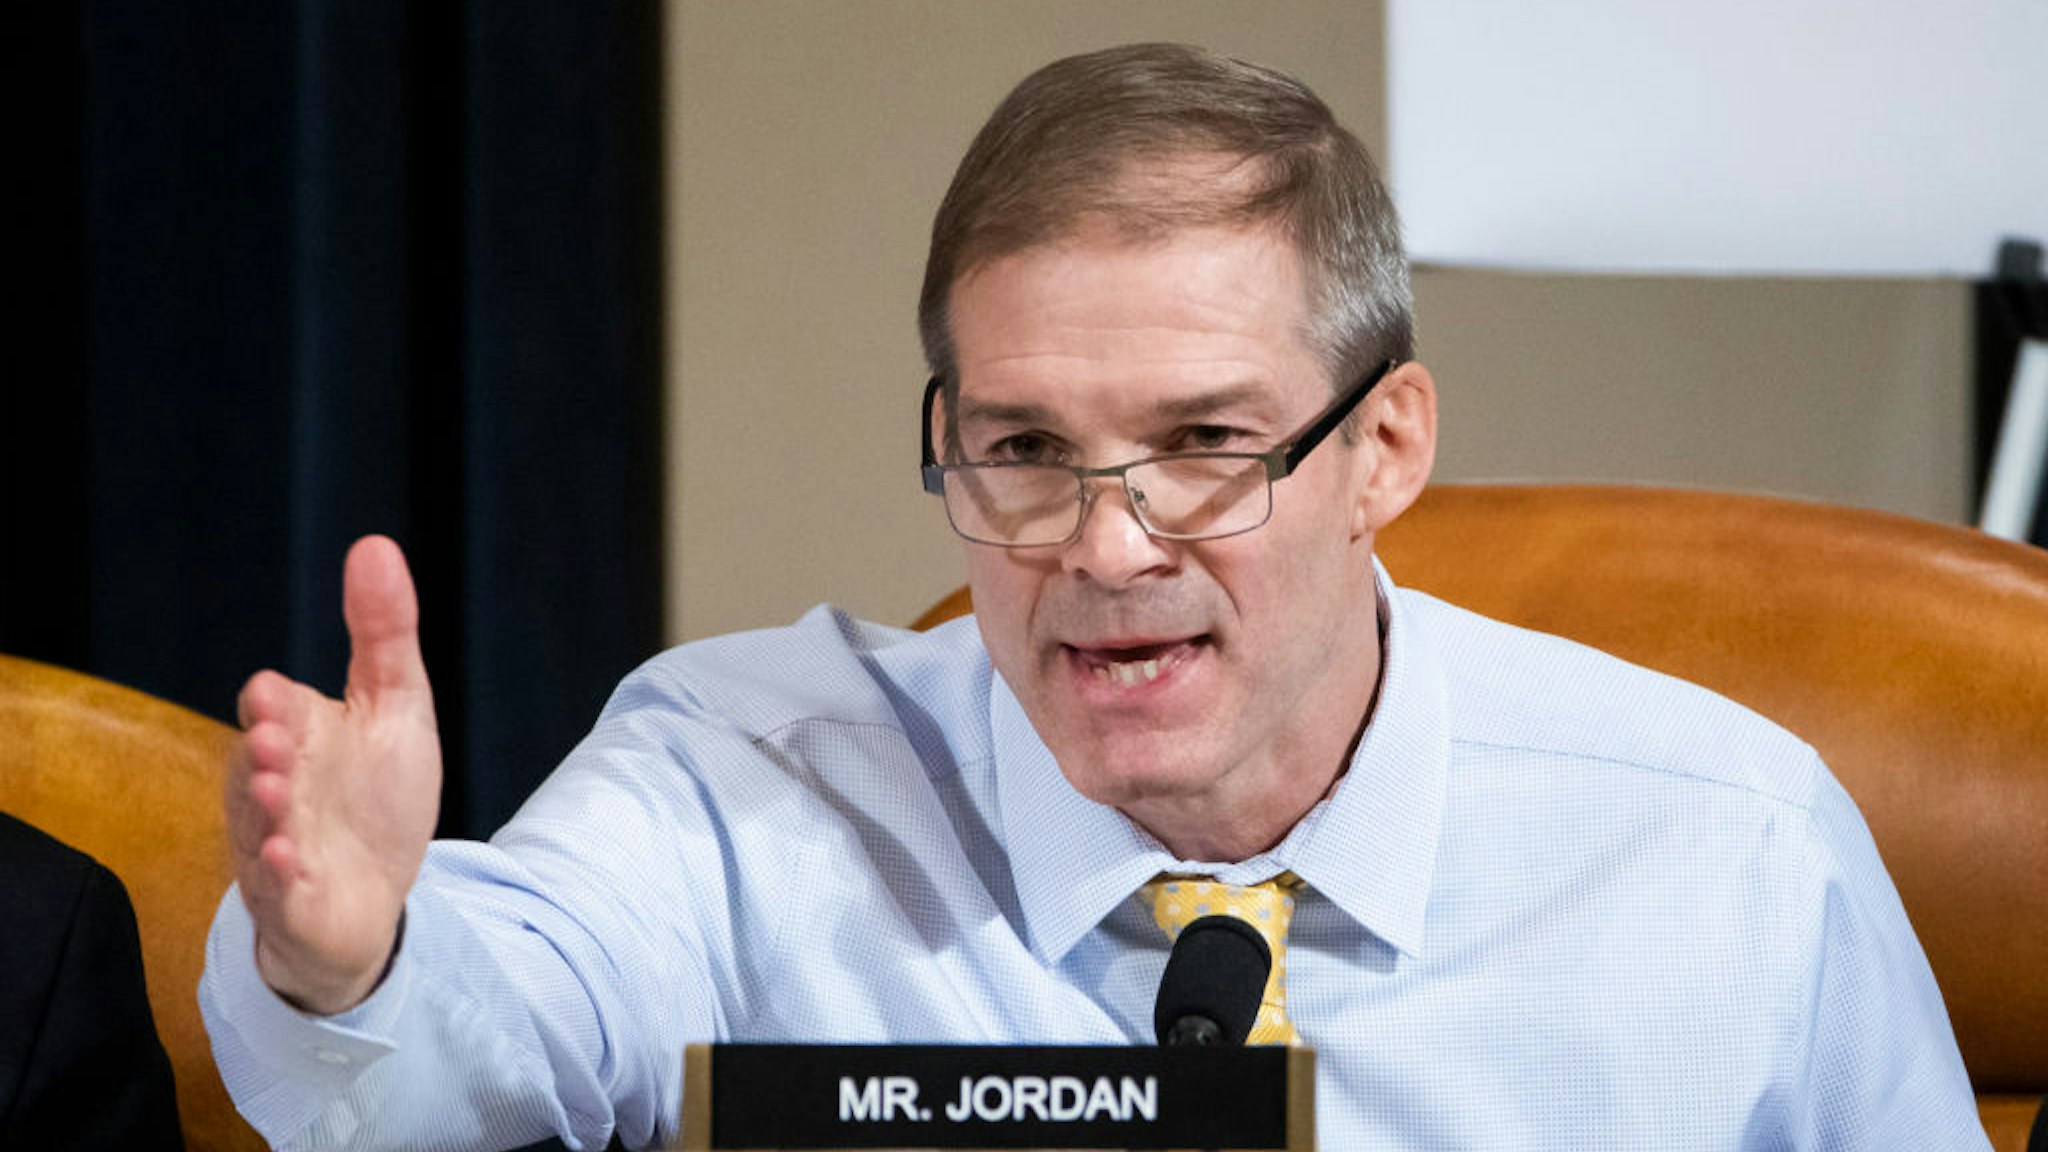 Republican Representative from Ohio Jim Jordan questions Charge d'Affaires at the US embassy in Ukraine Bill Taylor during the House Permanent Select Committee on Intelligence hearing on the impeachment inquiry into US President Donald J. Trump, on Capitol Hill November 13, 2019 in Washington, DC.